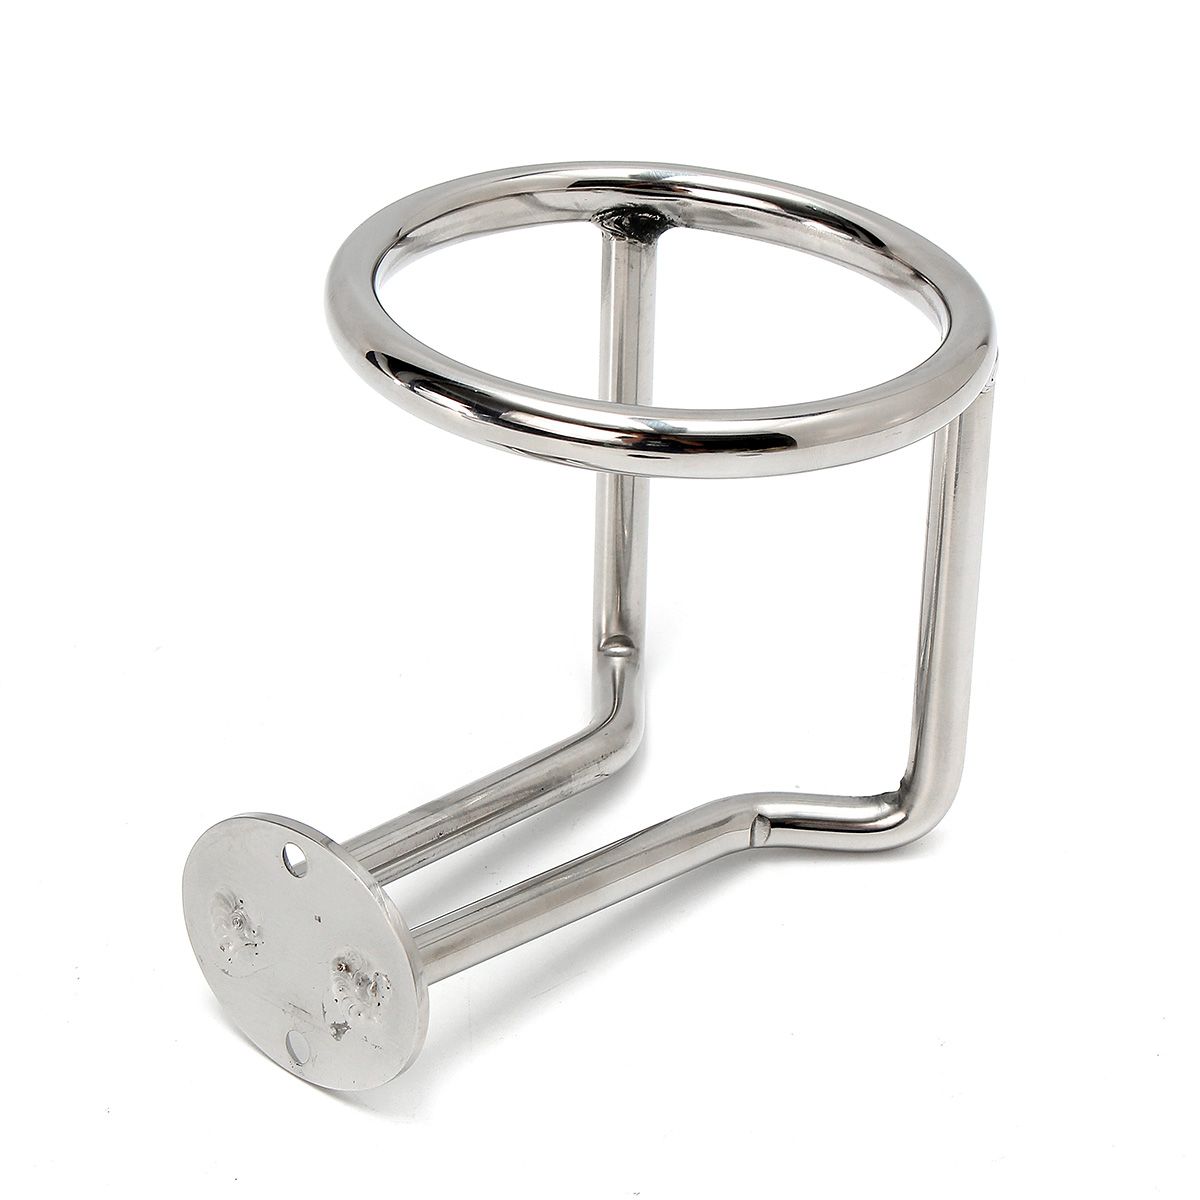 316-Stainless-Steel-Drink-Beverage-Bottle-Cup-Holder-Ring-for-Marine-Boat-Yacht-1175544